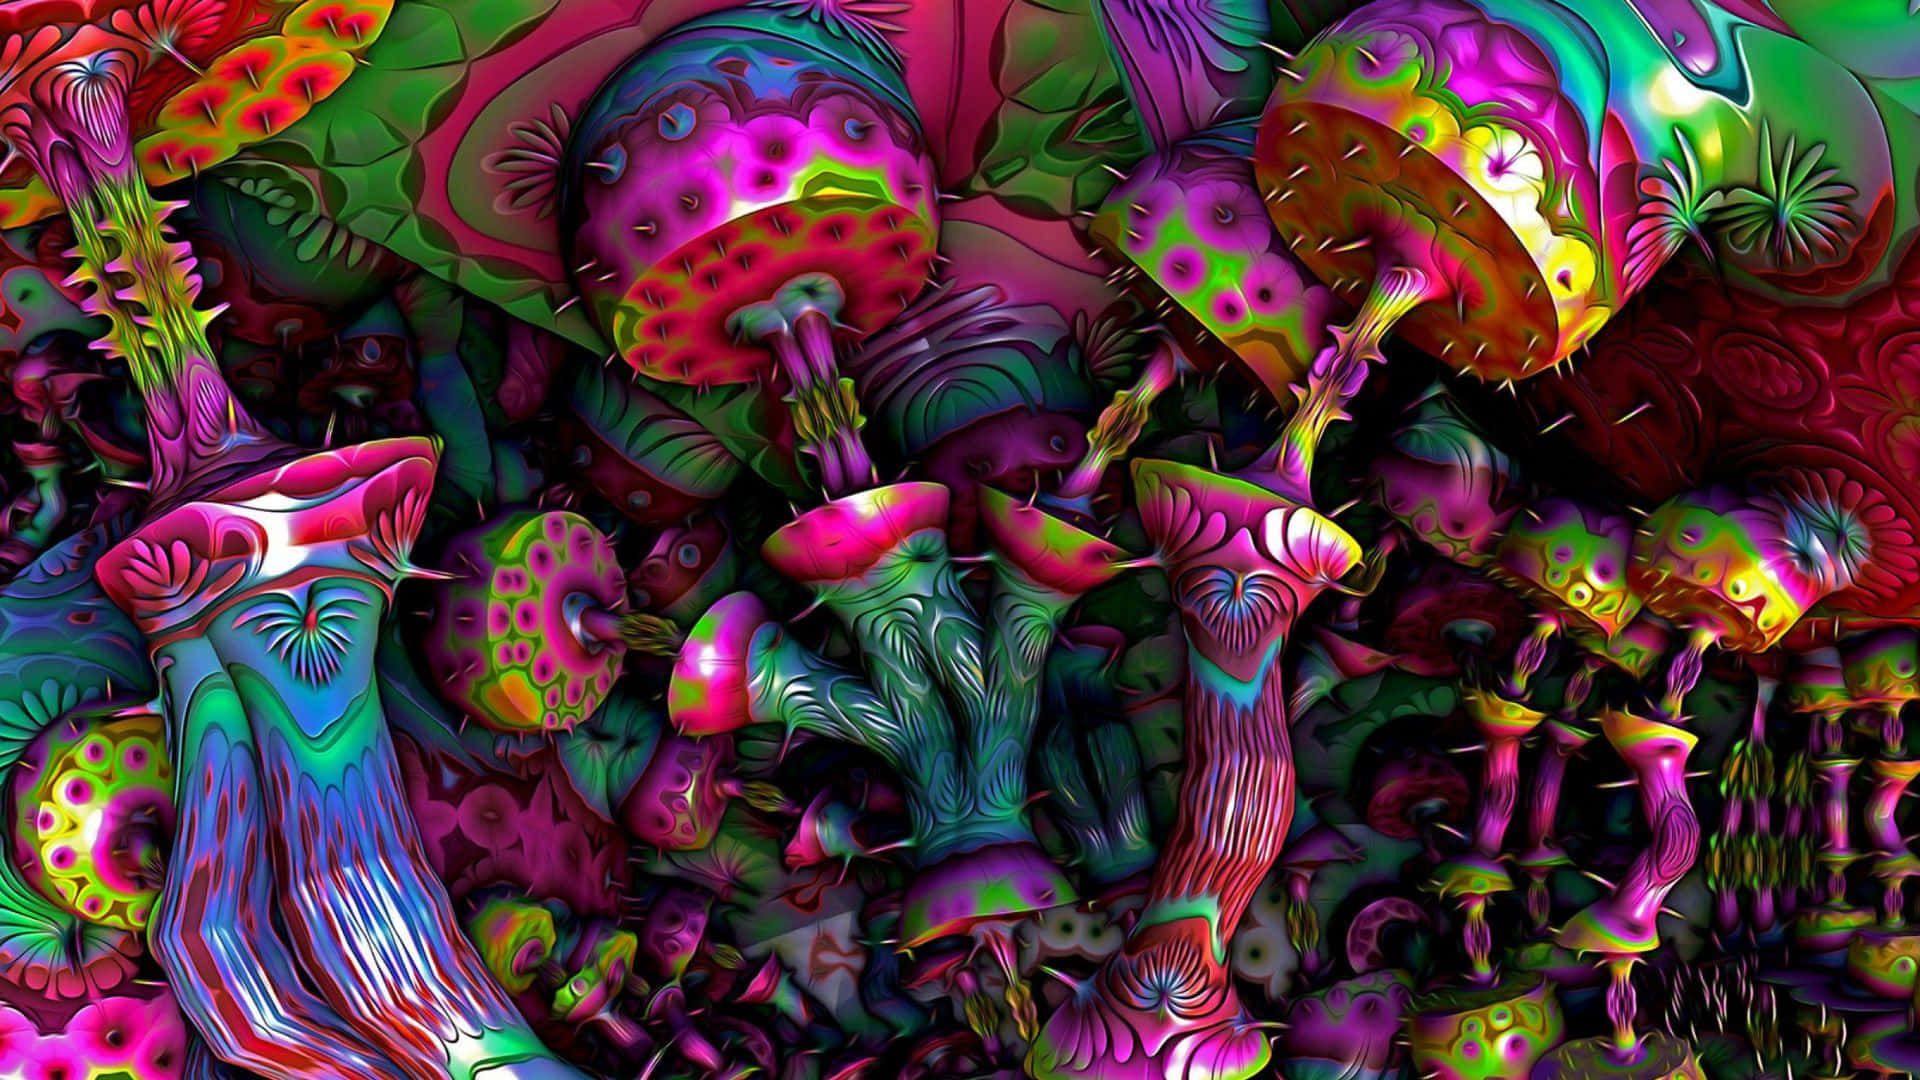 A colorful mushrooms wallpaper for your computer desktop - Psychedelic